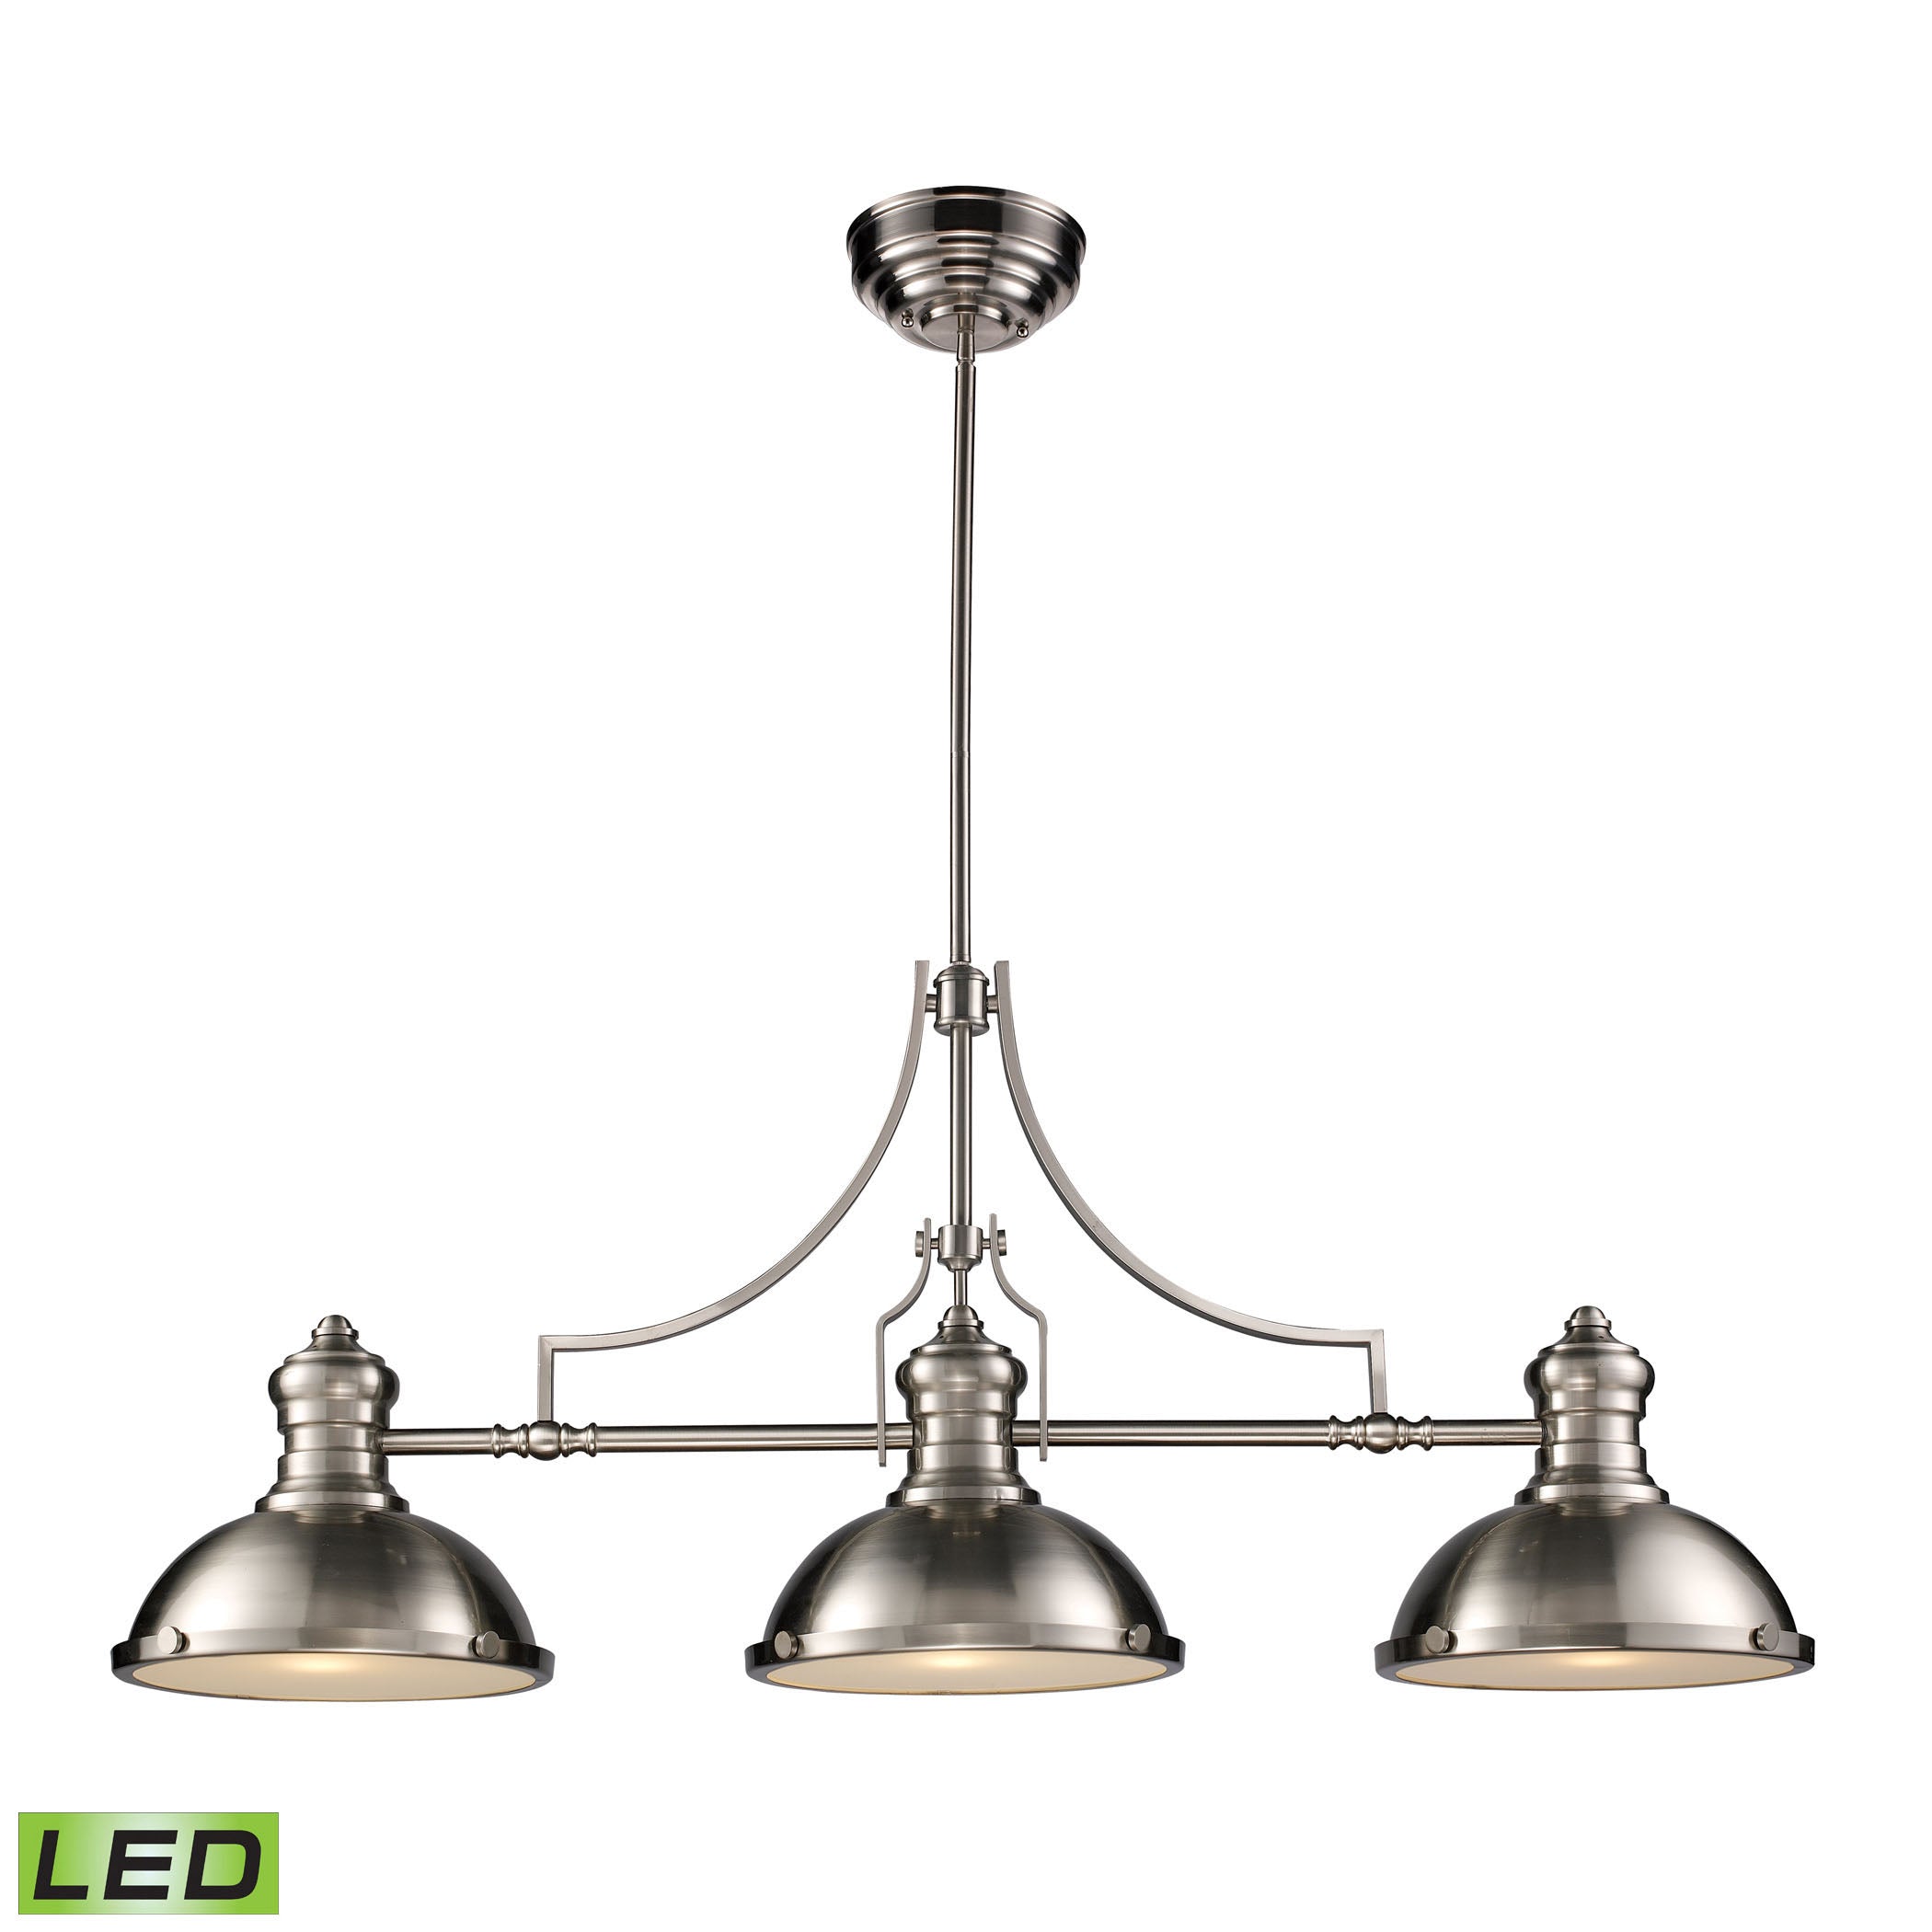 ELK Lighting 66125-3-LED Chadwick 3-Light Island Light in Satin Nickel with Matching Shade - Includes LED Bulbs